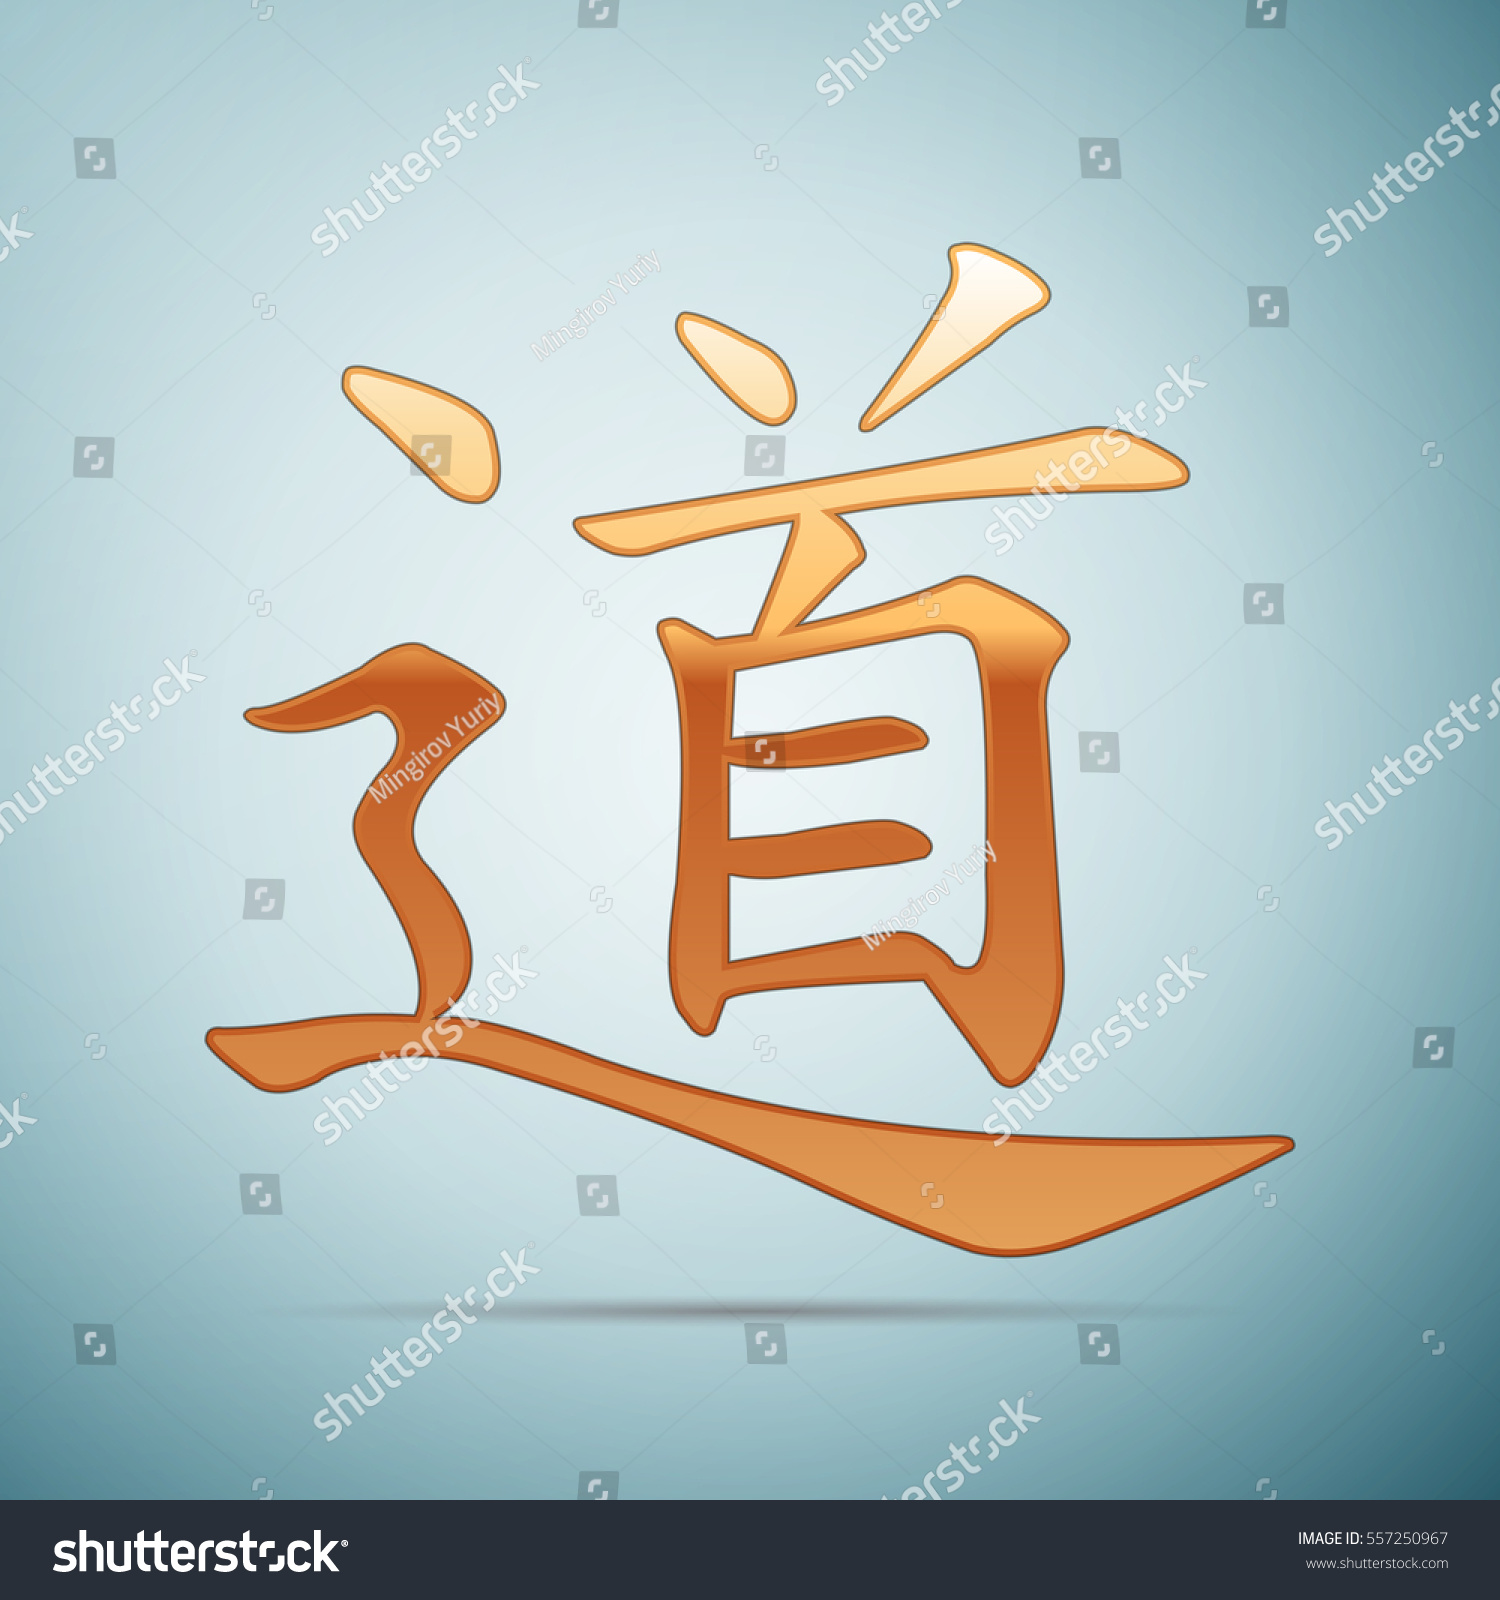 Gold Chinese Calligraphy Translation Meaning Dao Stock Vector 557250967 ...